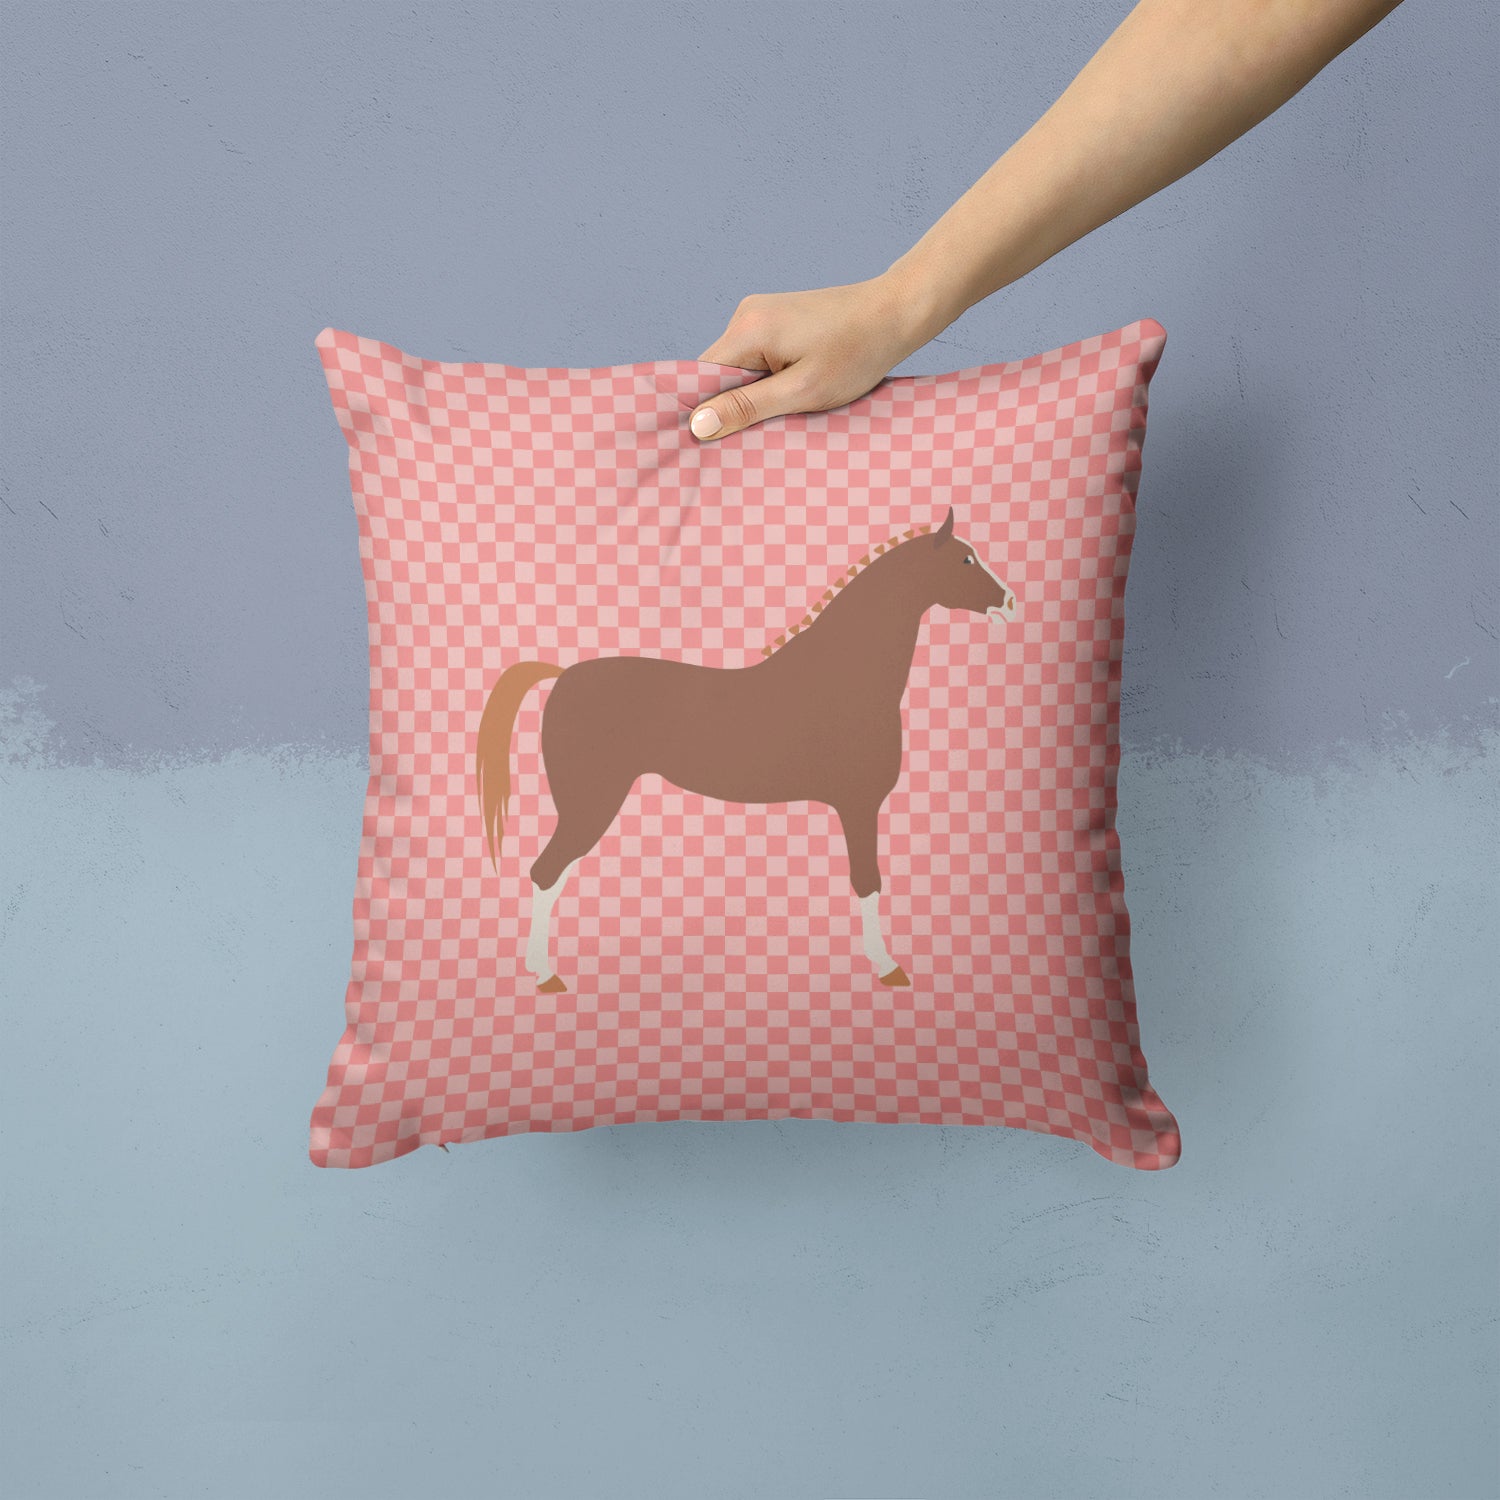 Hannoverian Horse Pink Check Fabric Decorative Pillow BB7909PW1414 - the-store.com